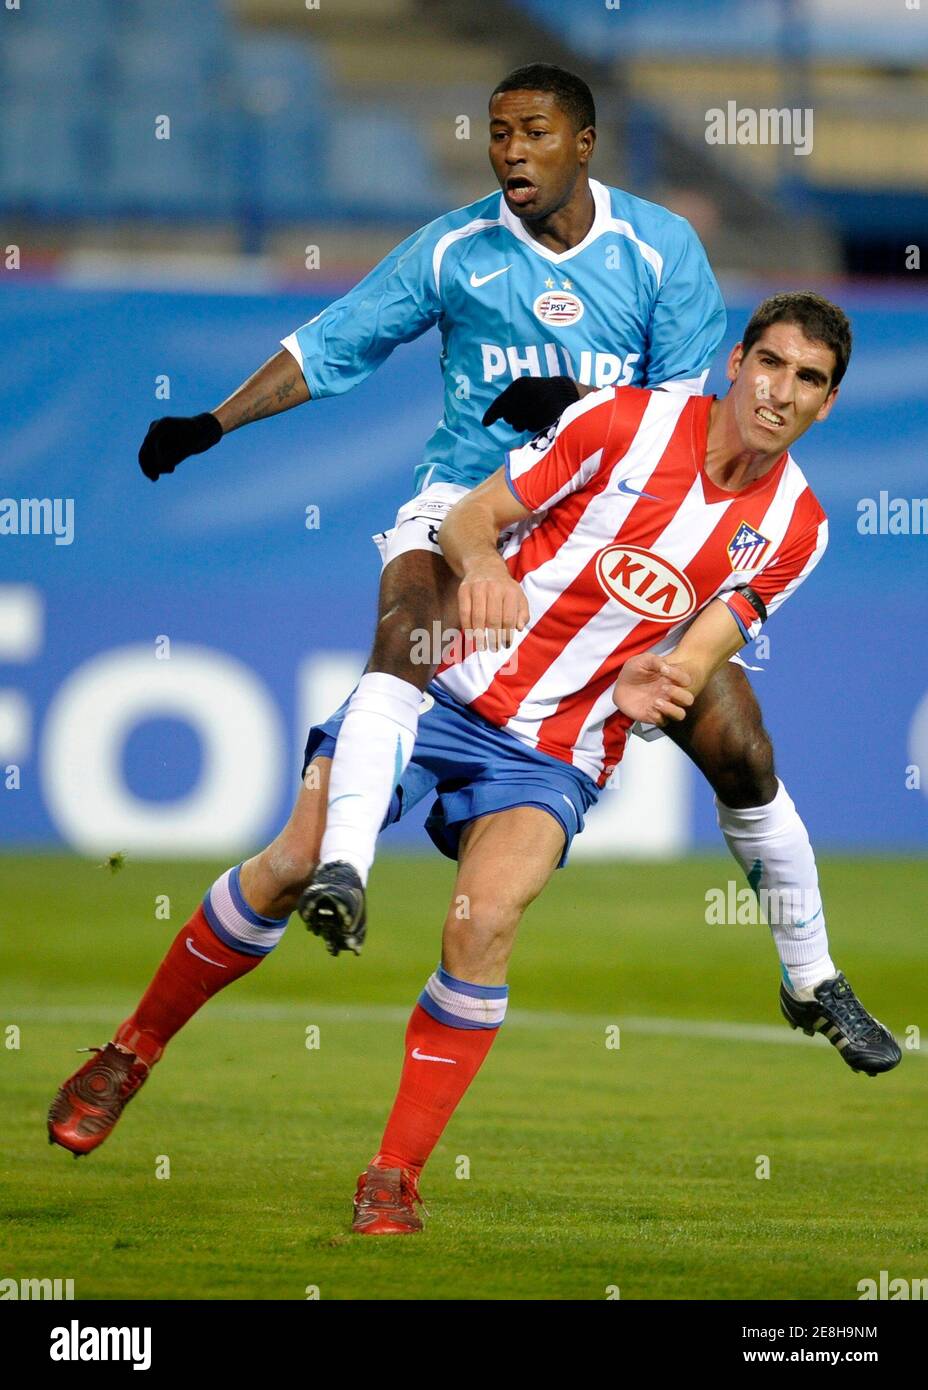 PSV Eindhoven's Edison Mendez falls over Atletico Madrid's Raul Garcia (R)  during their Champions League soccer match at Vicente Calderon stadium in  Madrid, November 26, 2008. UEFA has ordered the Group D